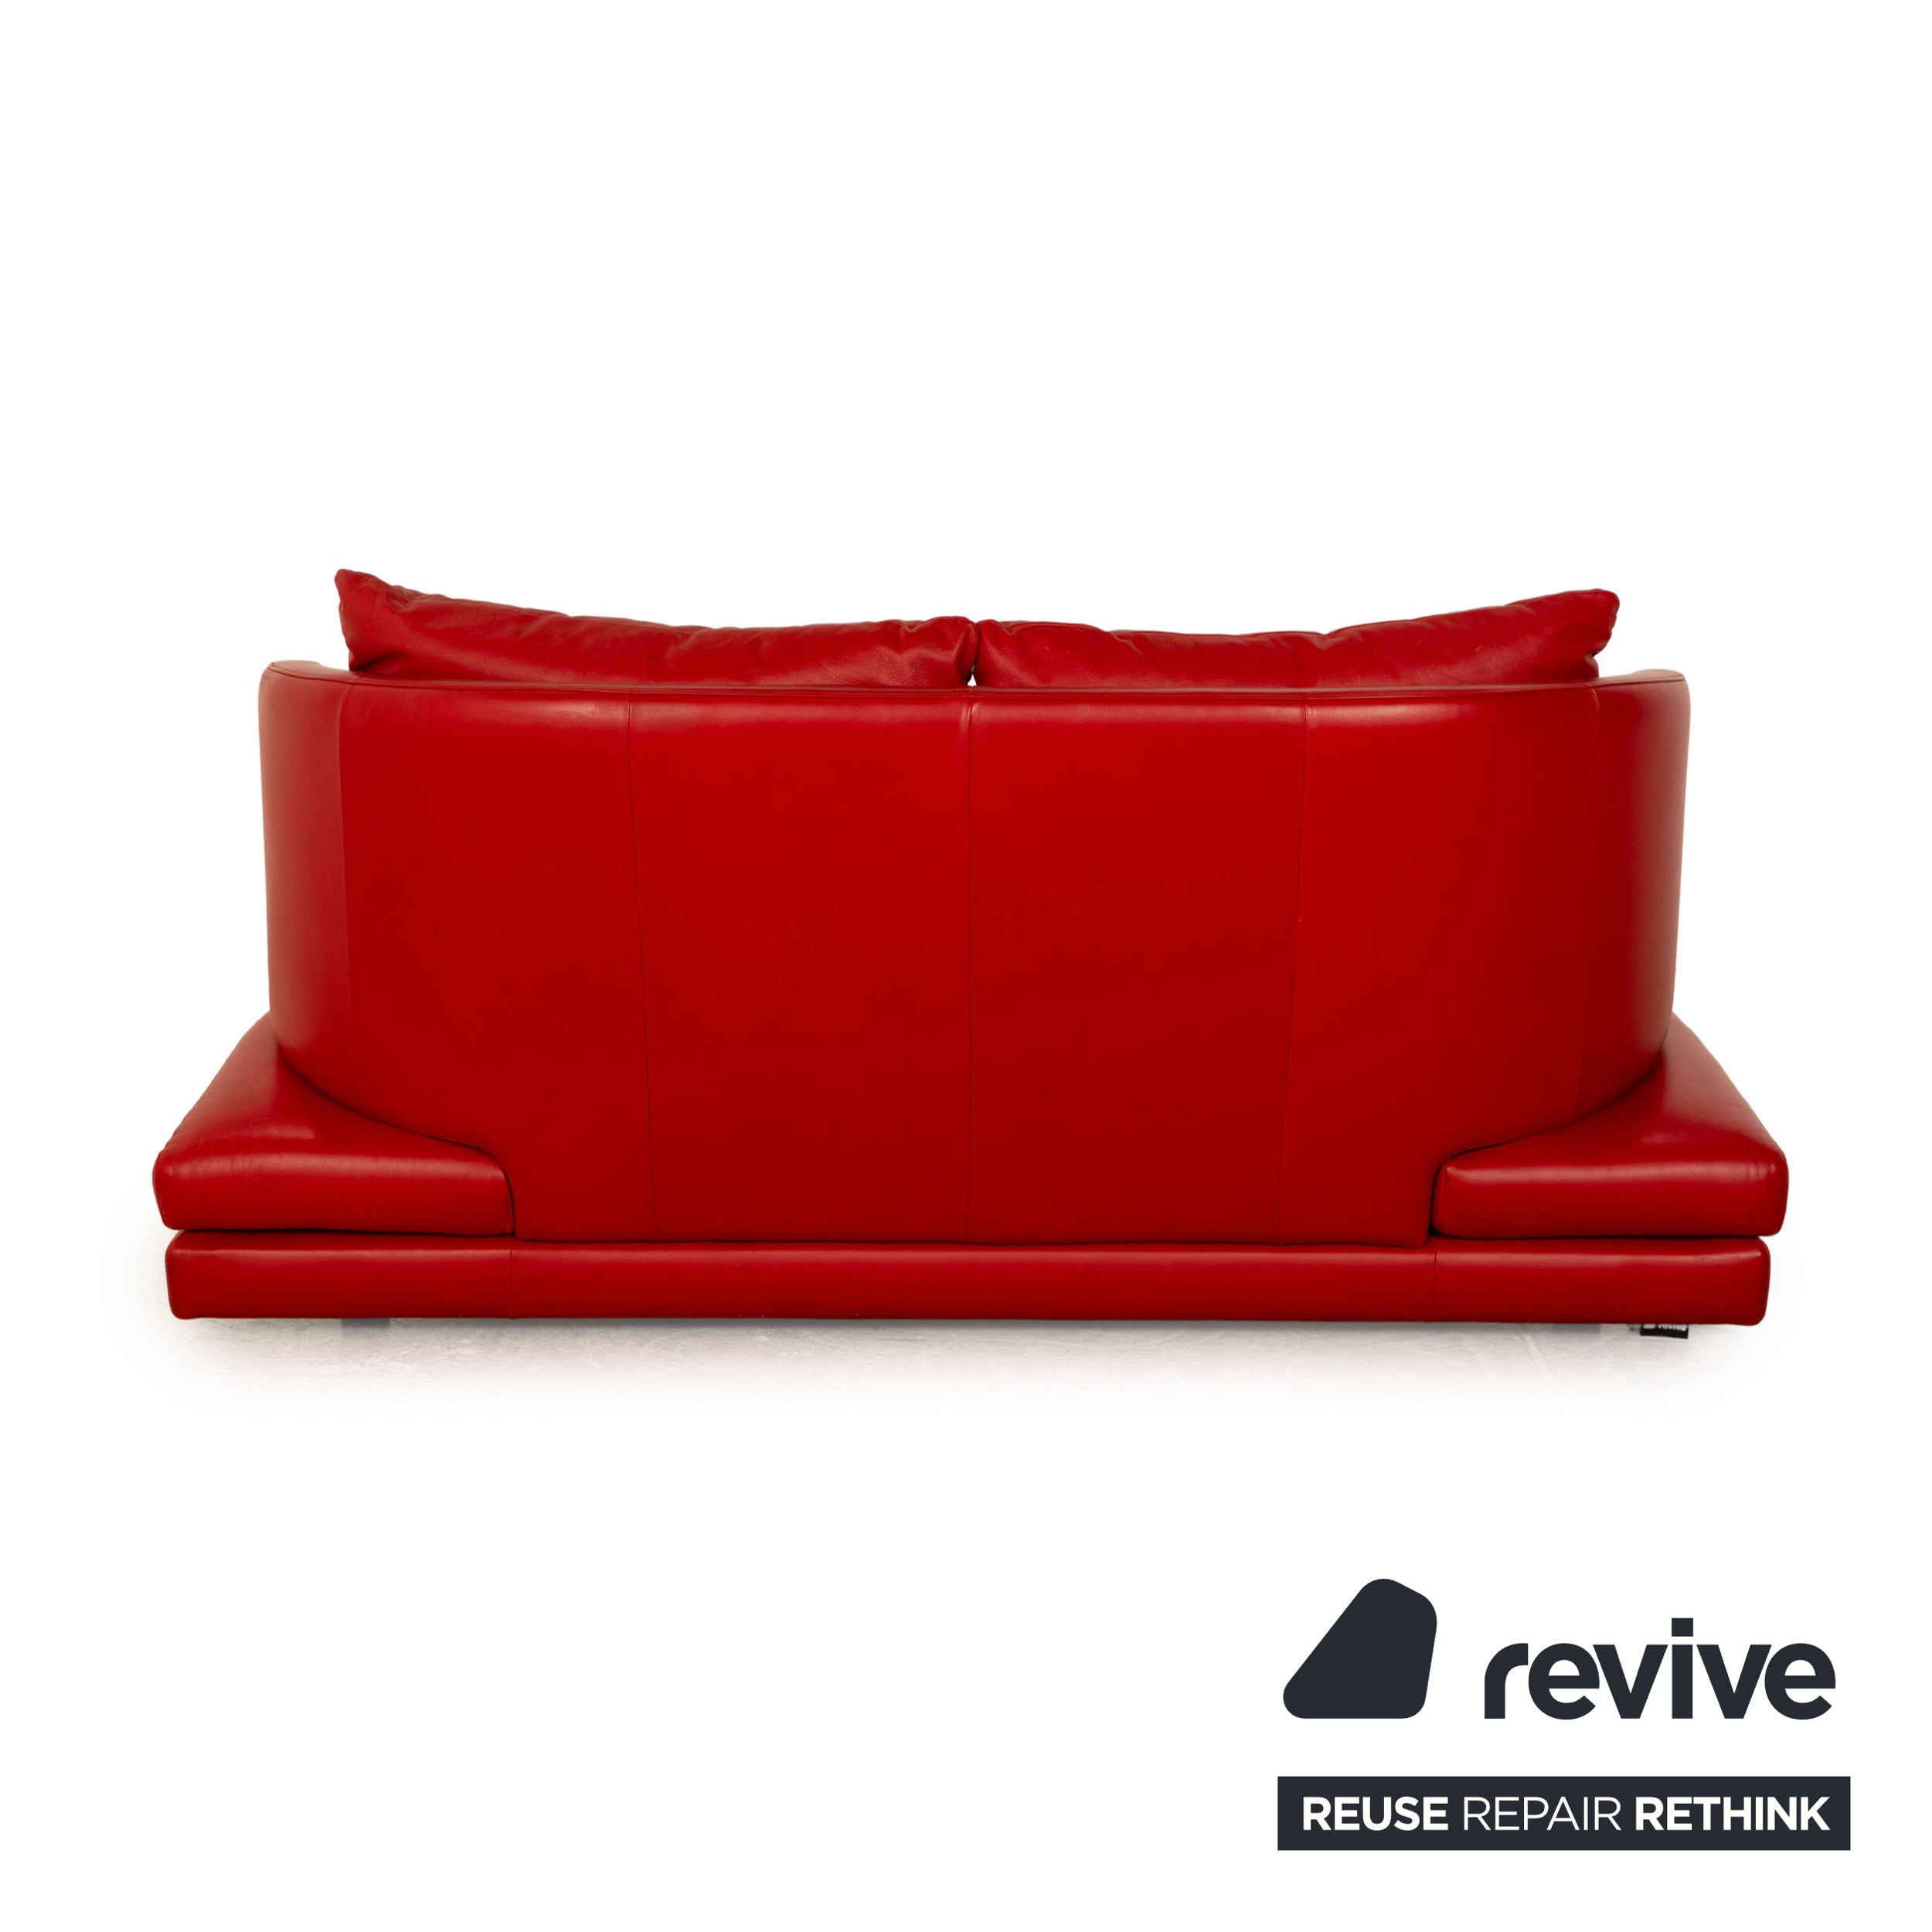 Rolf Benz 2800 leather lounger red